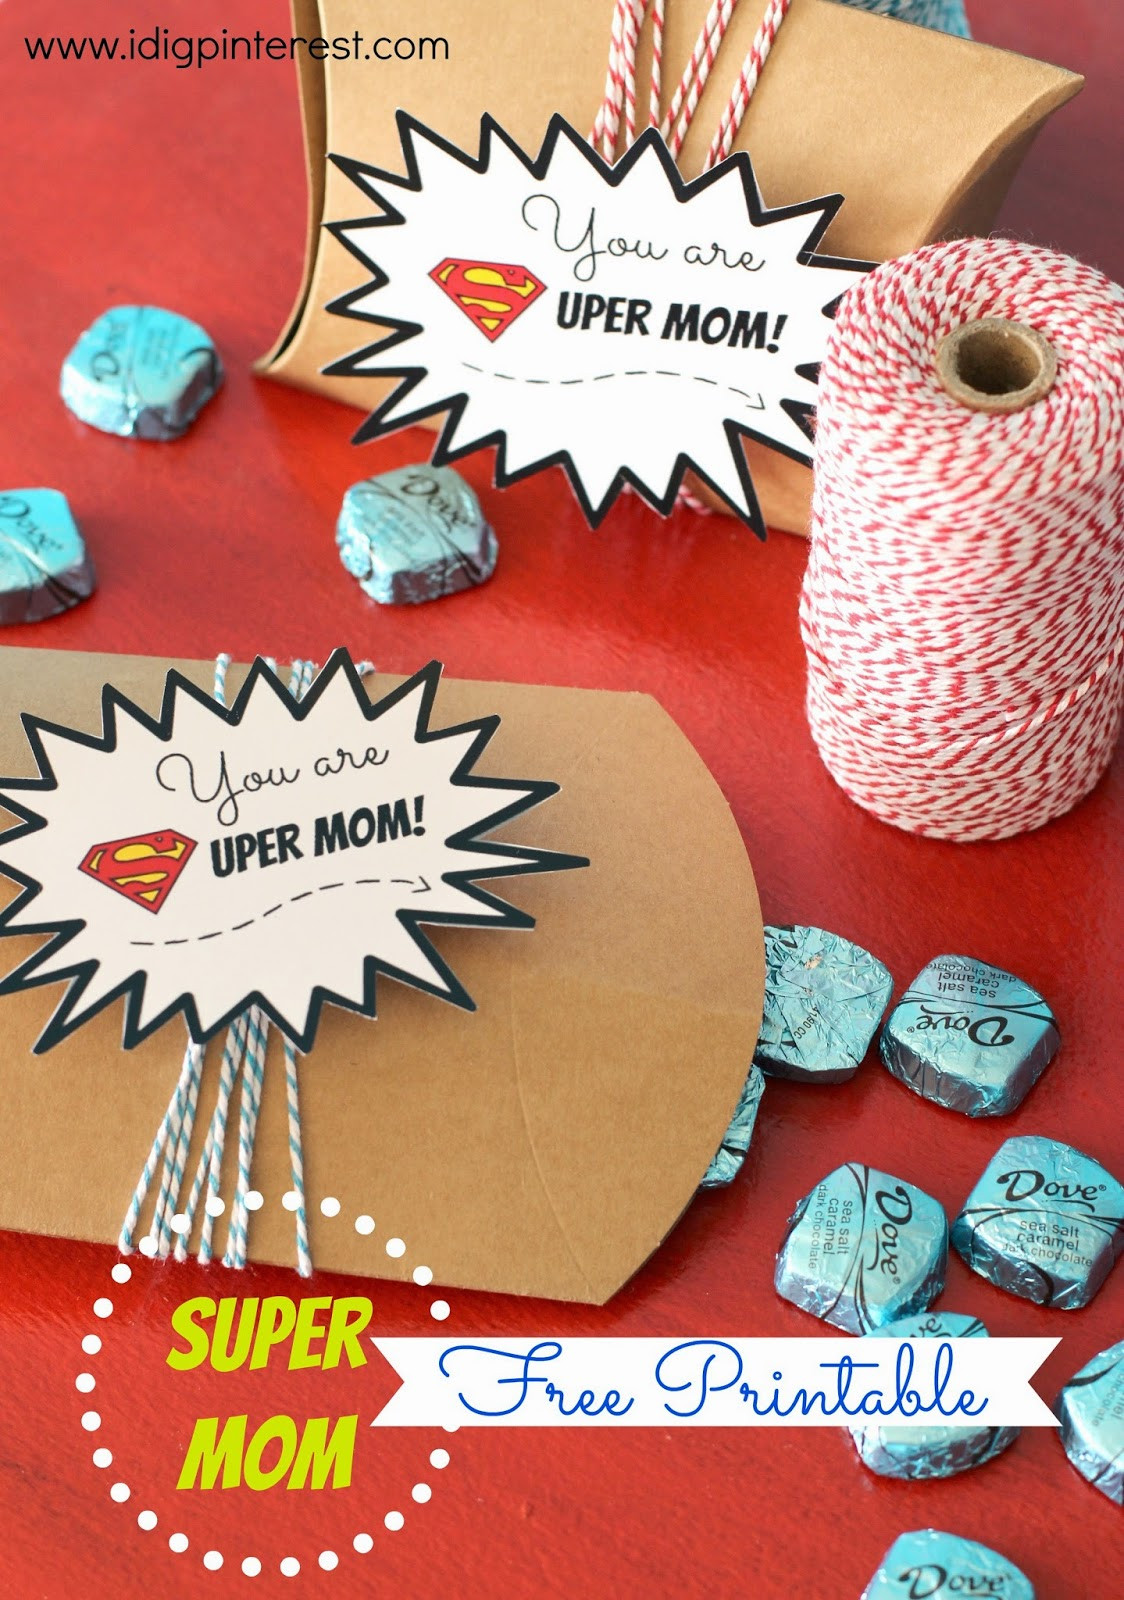 Free Mother'S Day Gift Ideas
 "SUPER MOM" Mother s Day Gift Free Printable I Dig